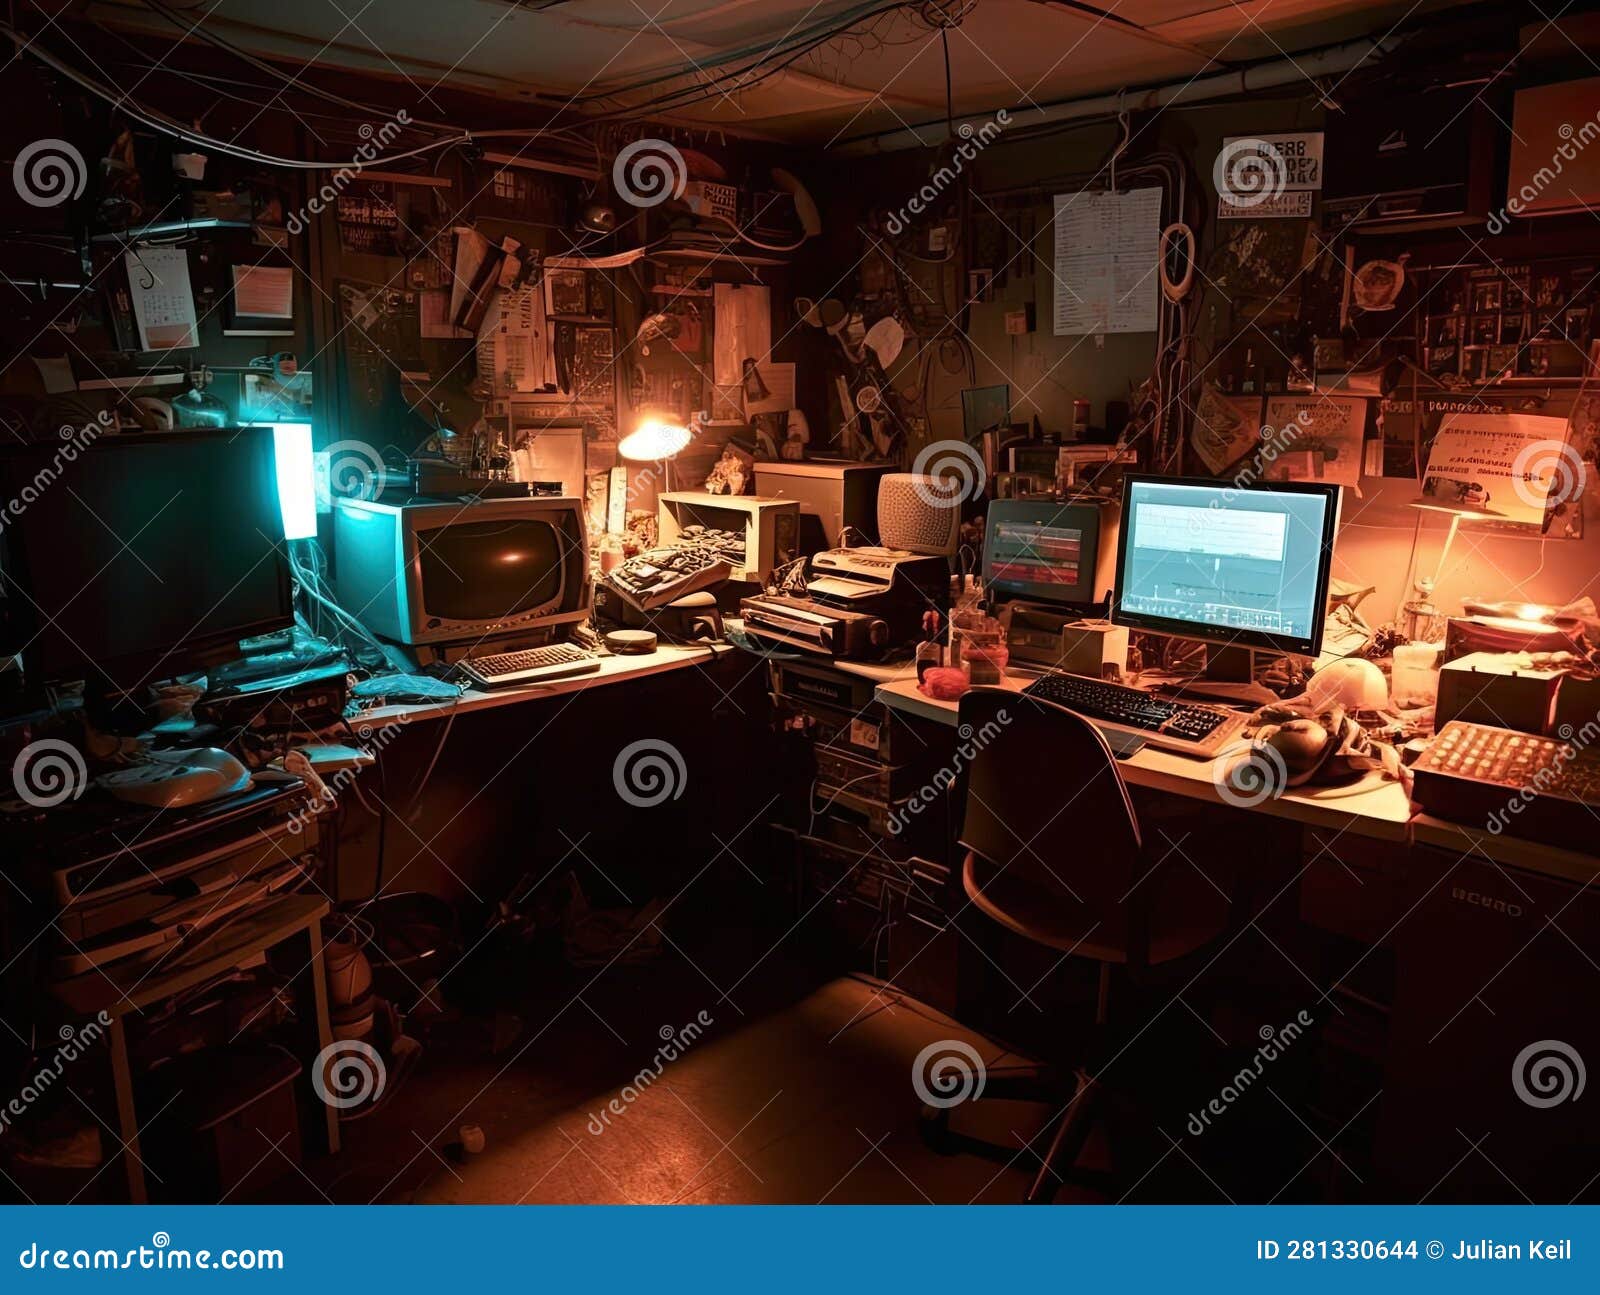 Futuristic Hacker Den with Computers and Gadgets Stock